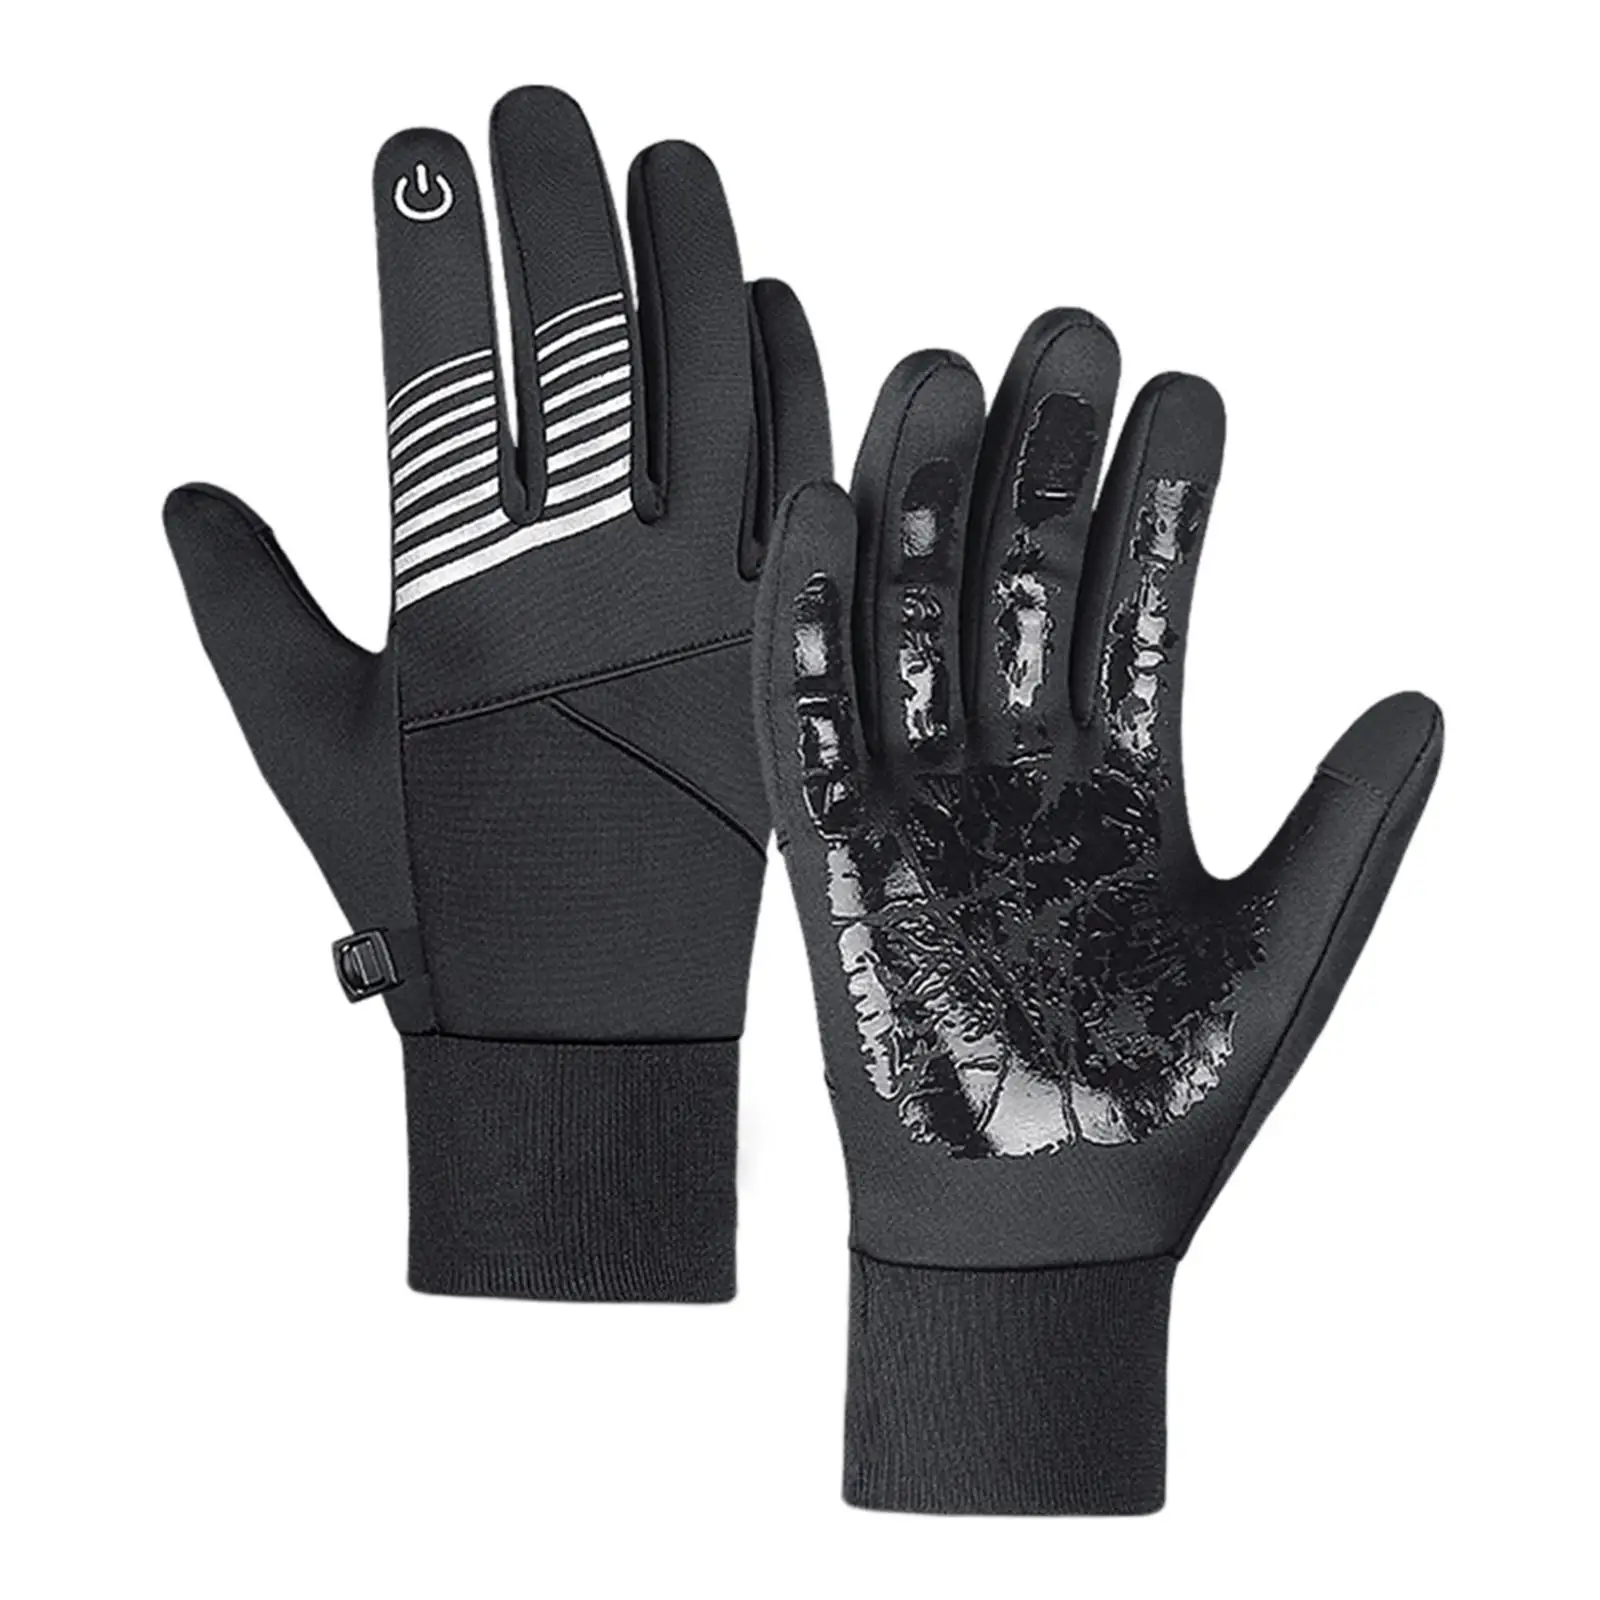 Winter Gloves Waterproof Wear Resistant Non Slip Palm for Skating